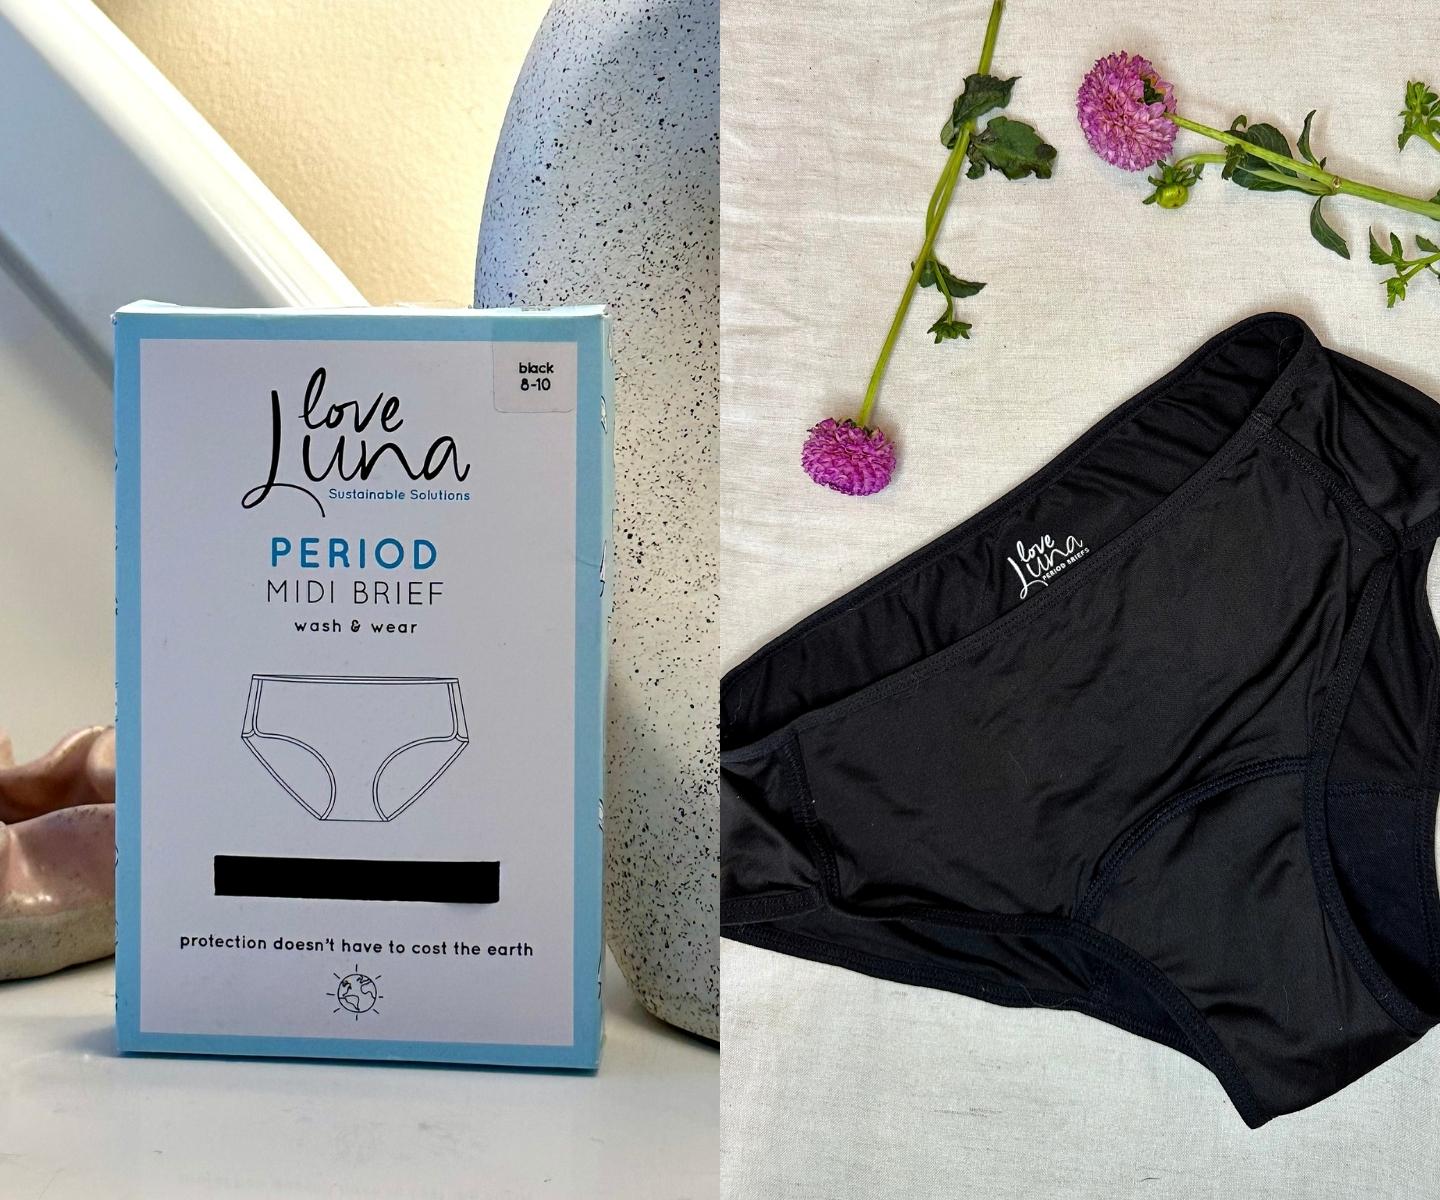 Love Luna period pants review: We put the brand's sustainable